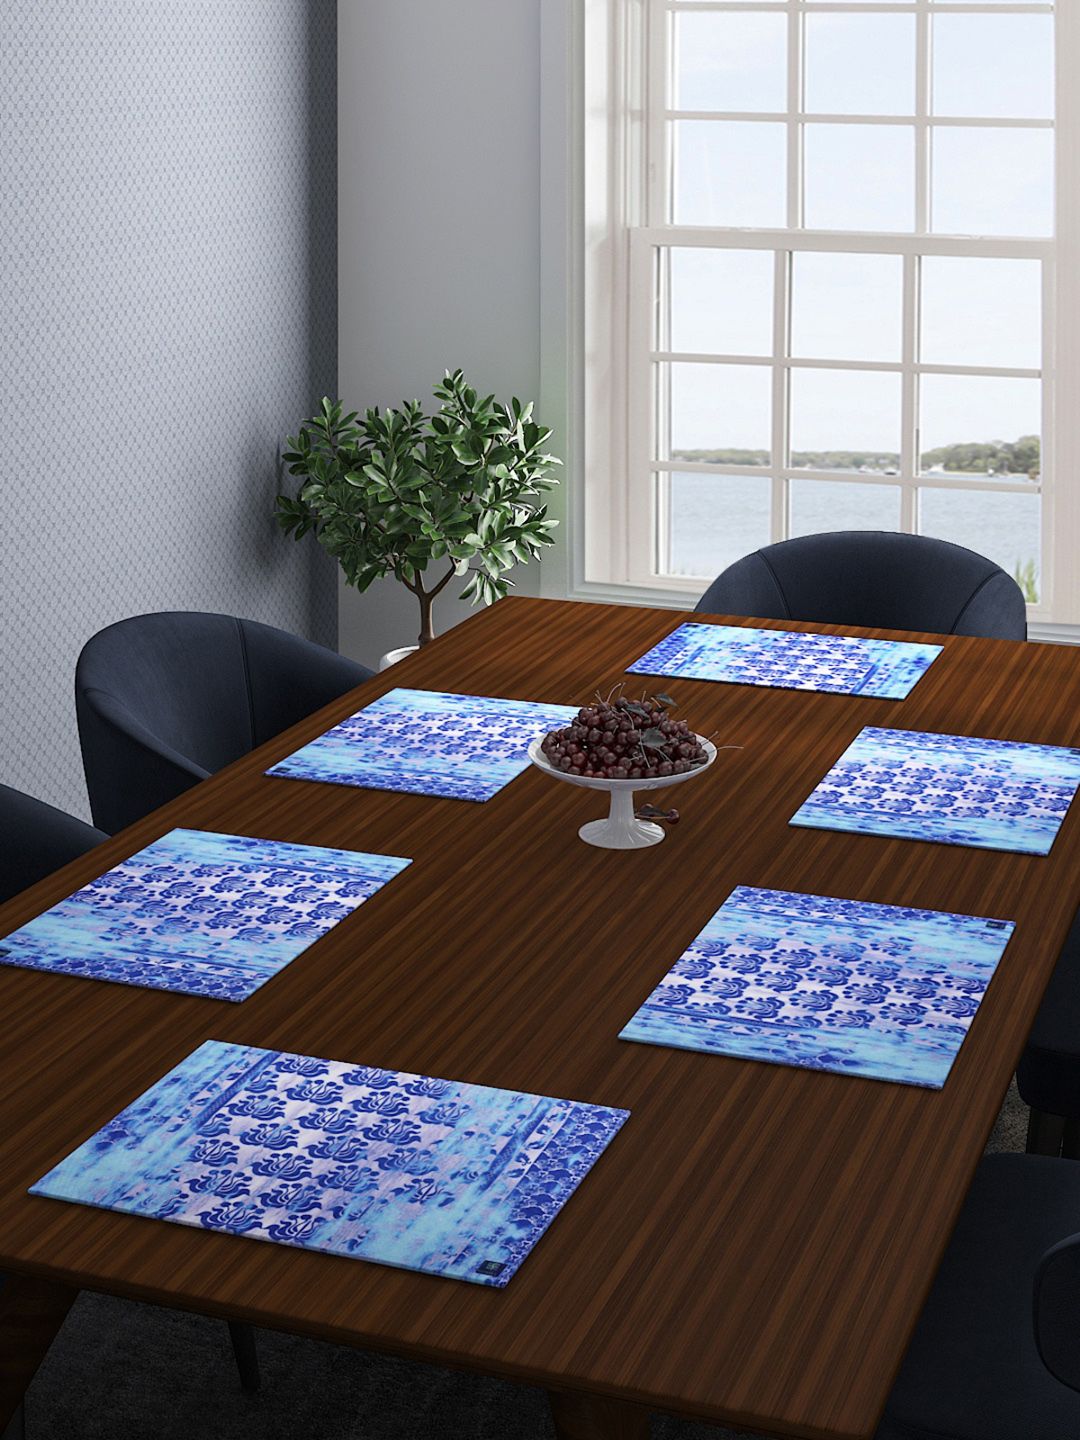 ROMEE Set of 6 Turquoise Blue Printed Table Mats Price in India